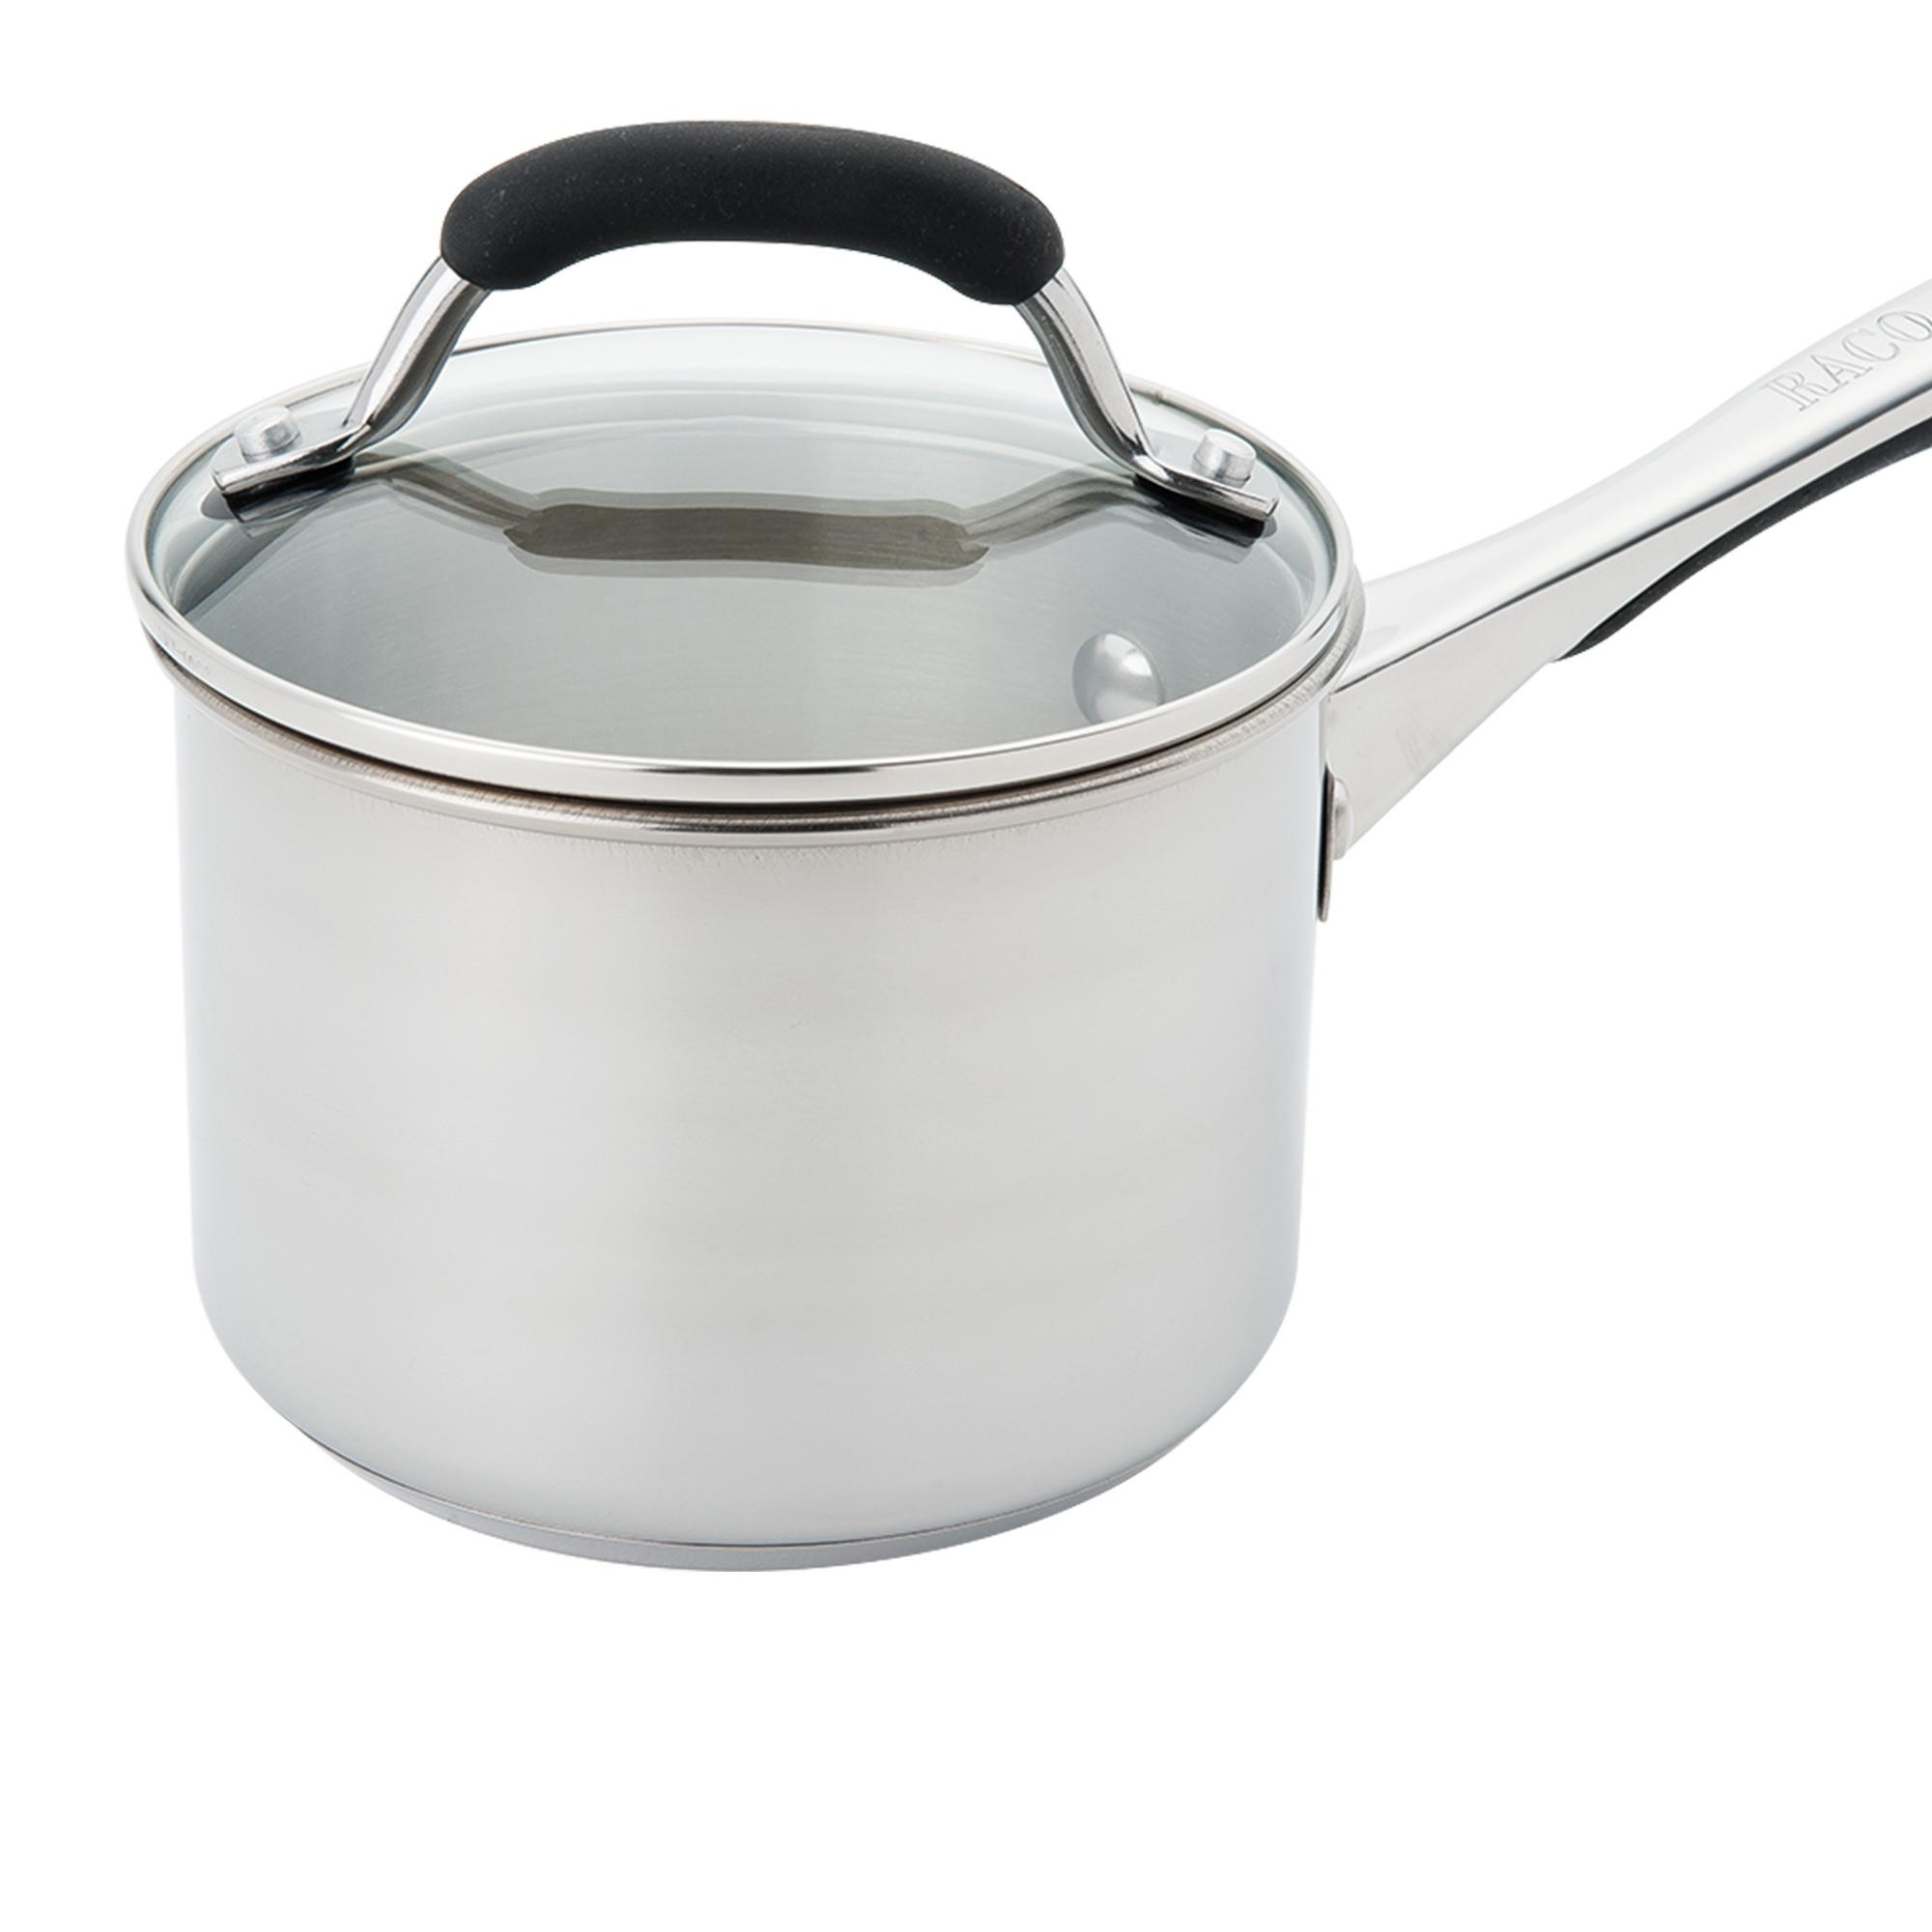 Raco Contemporary Stainless Steel Saucepan 16cm - 1.9L Image 4